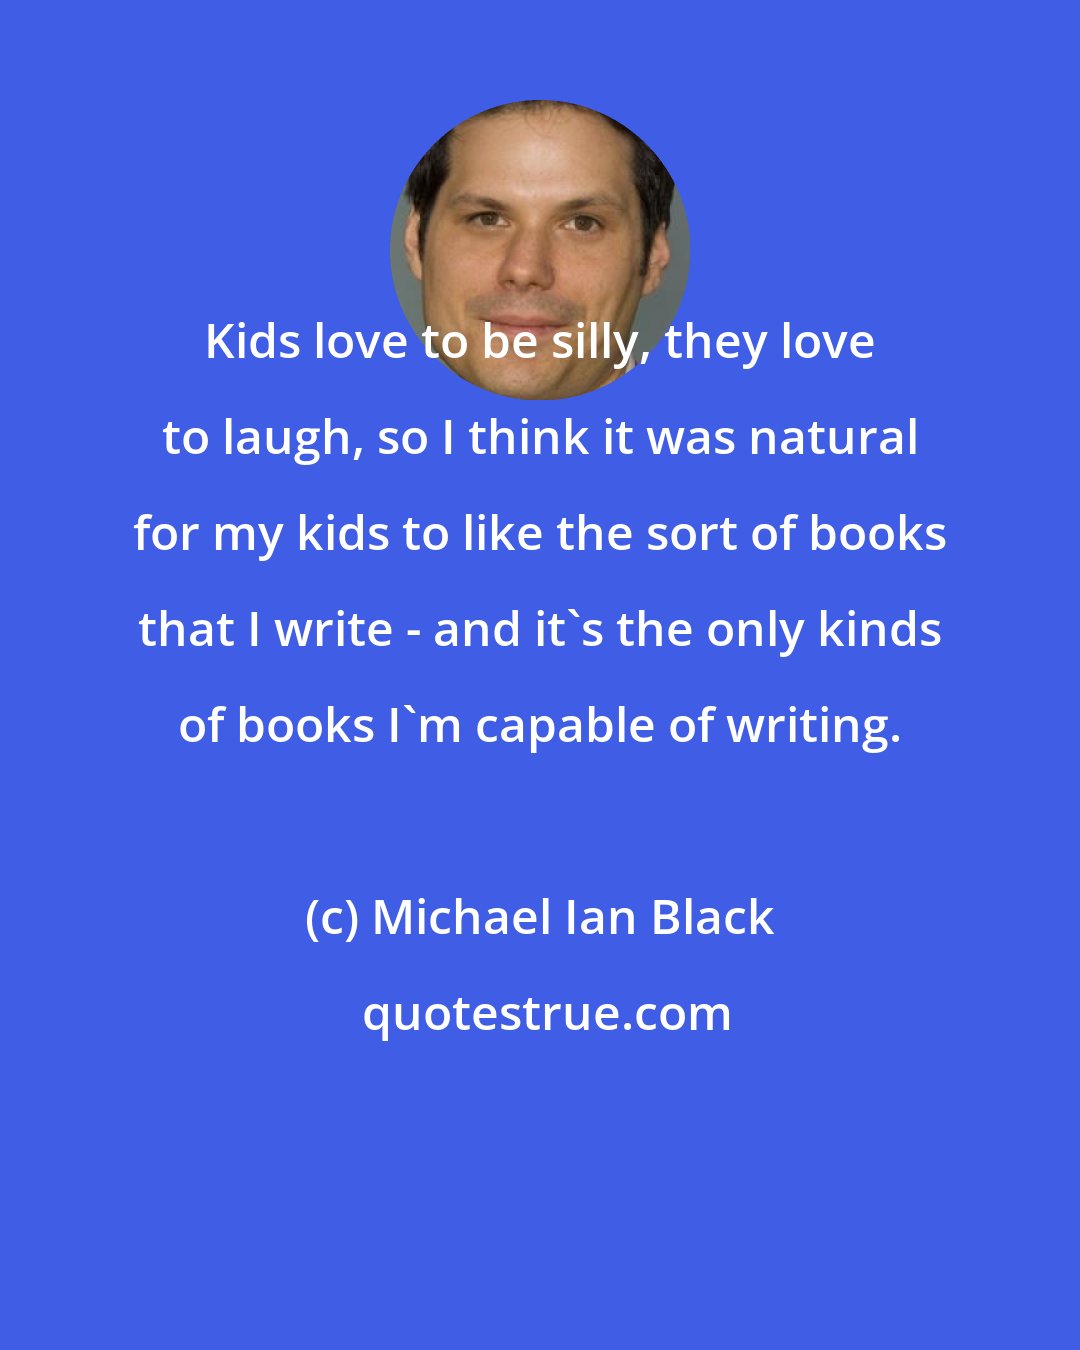 Michael Ian Black: Kids love to be silly, they love to laugh, so I think it was natural for my kids to like the sort of books that I write - and it's the only kinds of books I'm capable of writing.